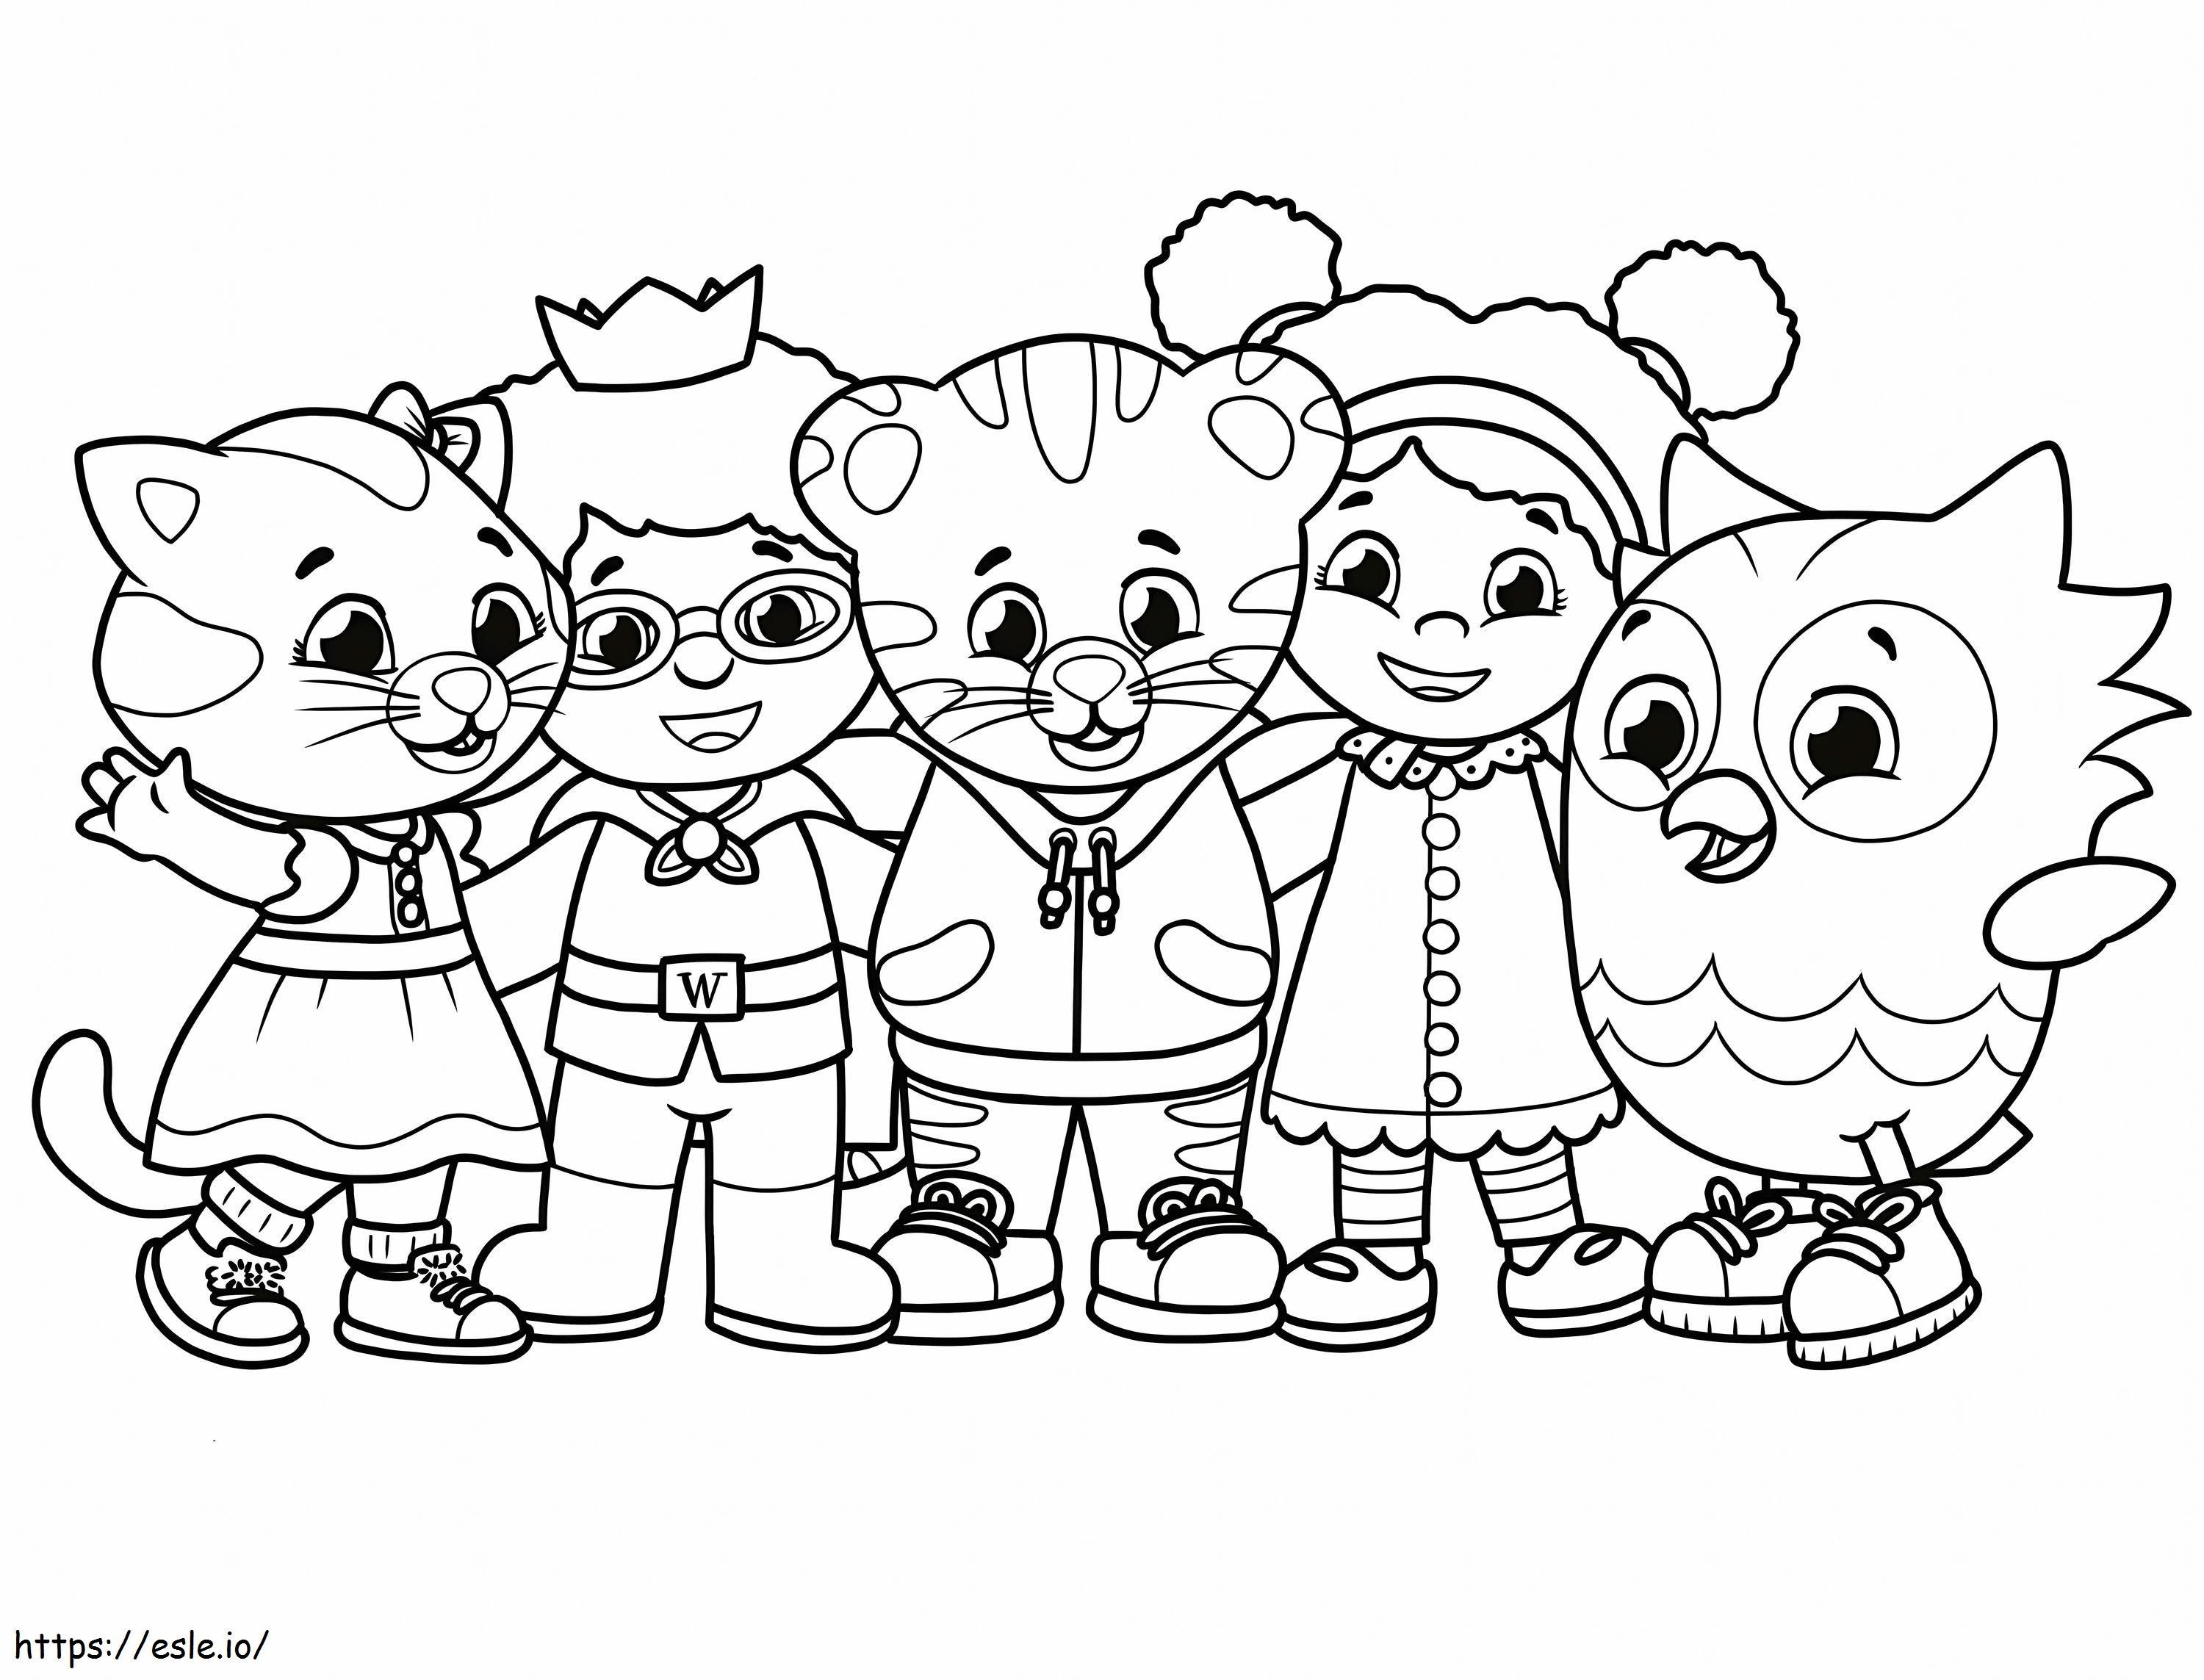 1573607713 1557764473Be My Neighbor Daniel Tiger Min coloring page